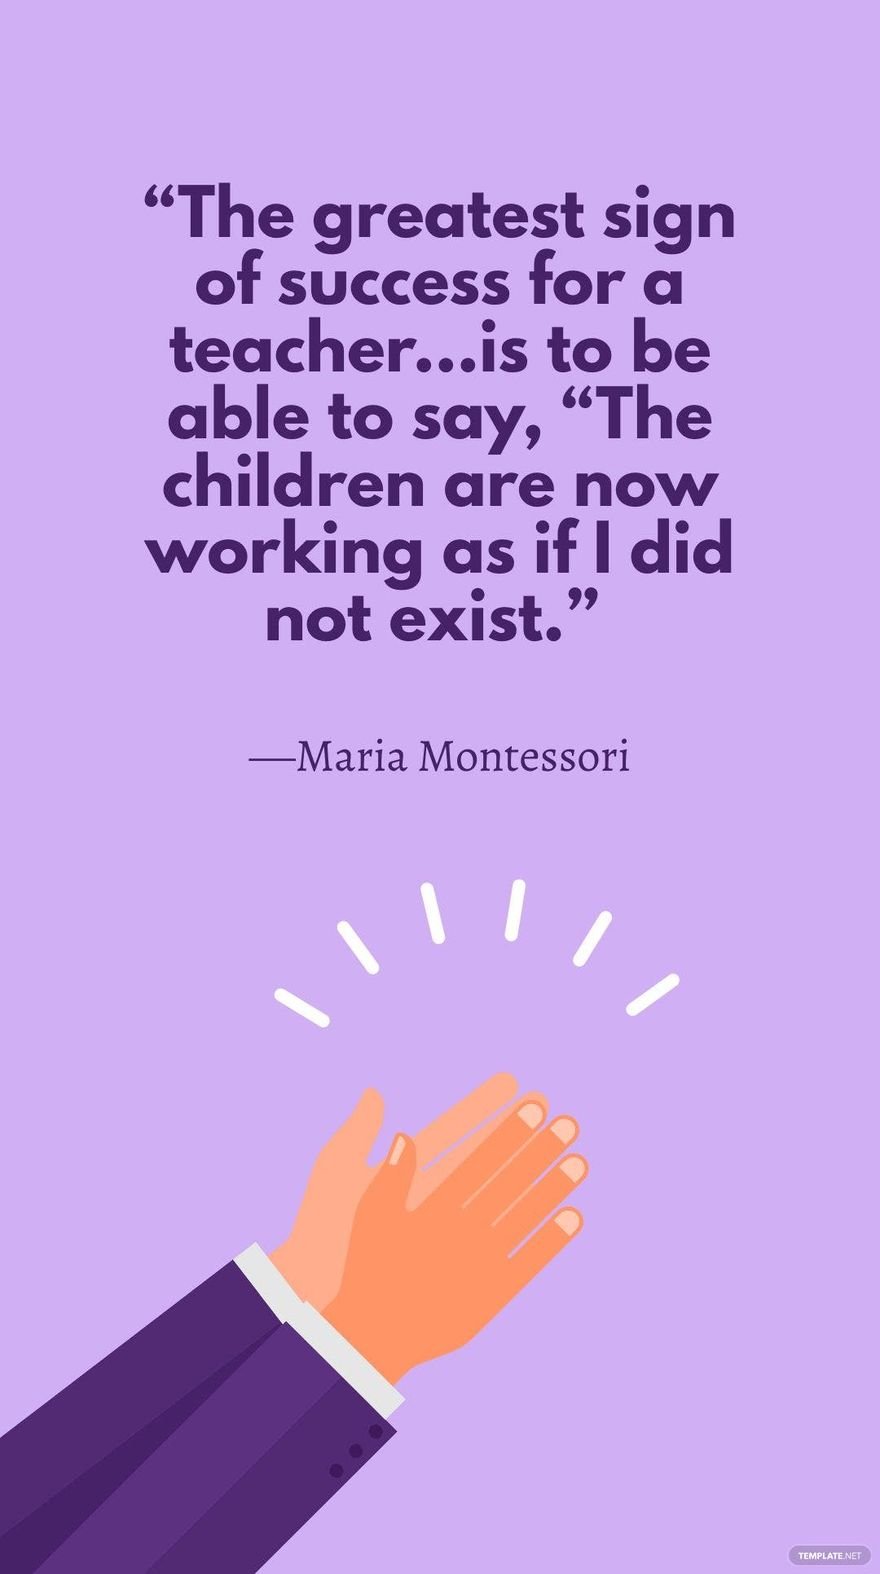 Maria Montessori - The greatest sign of success for a teacher…is to be able to say, “The children are now working as if I did not exist.